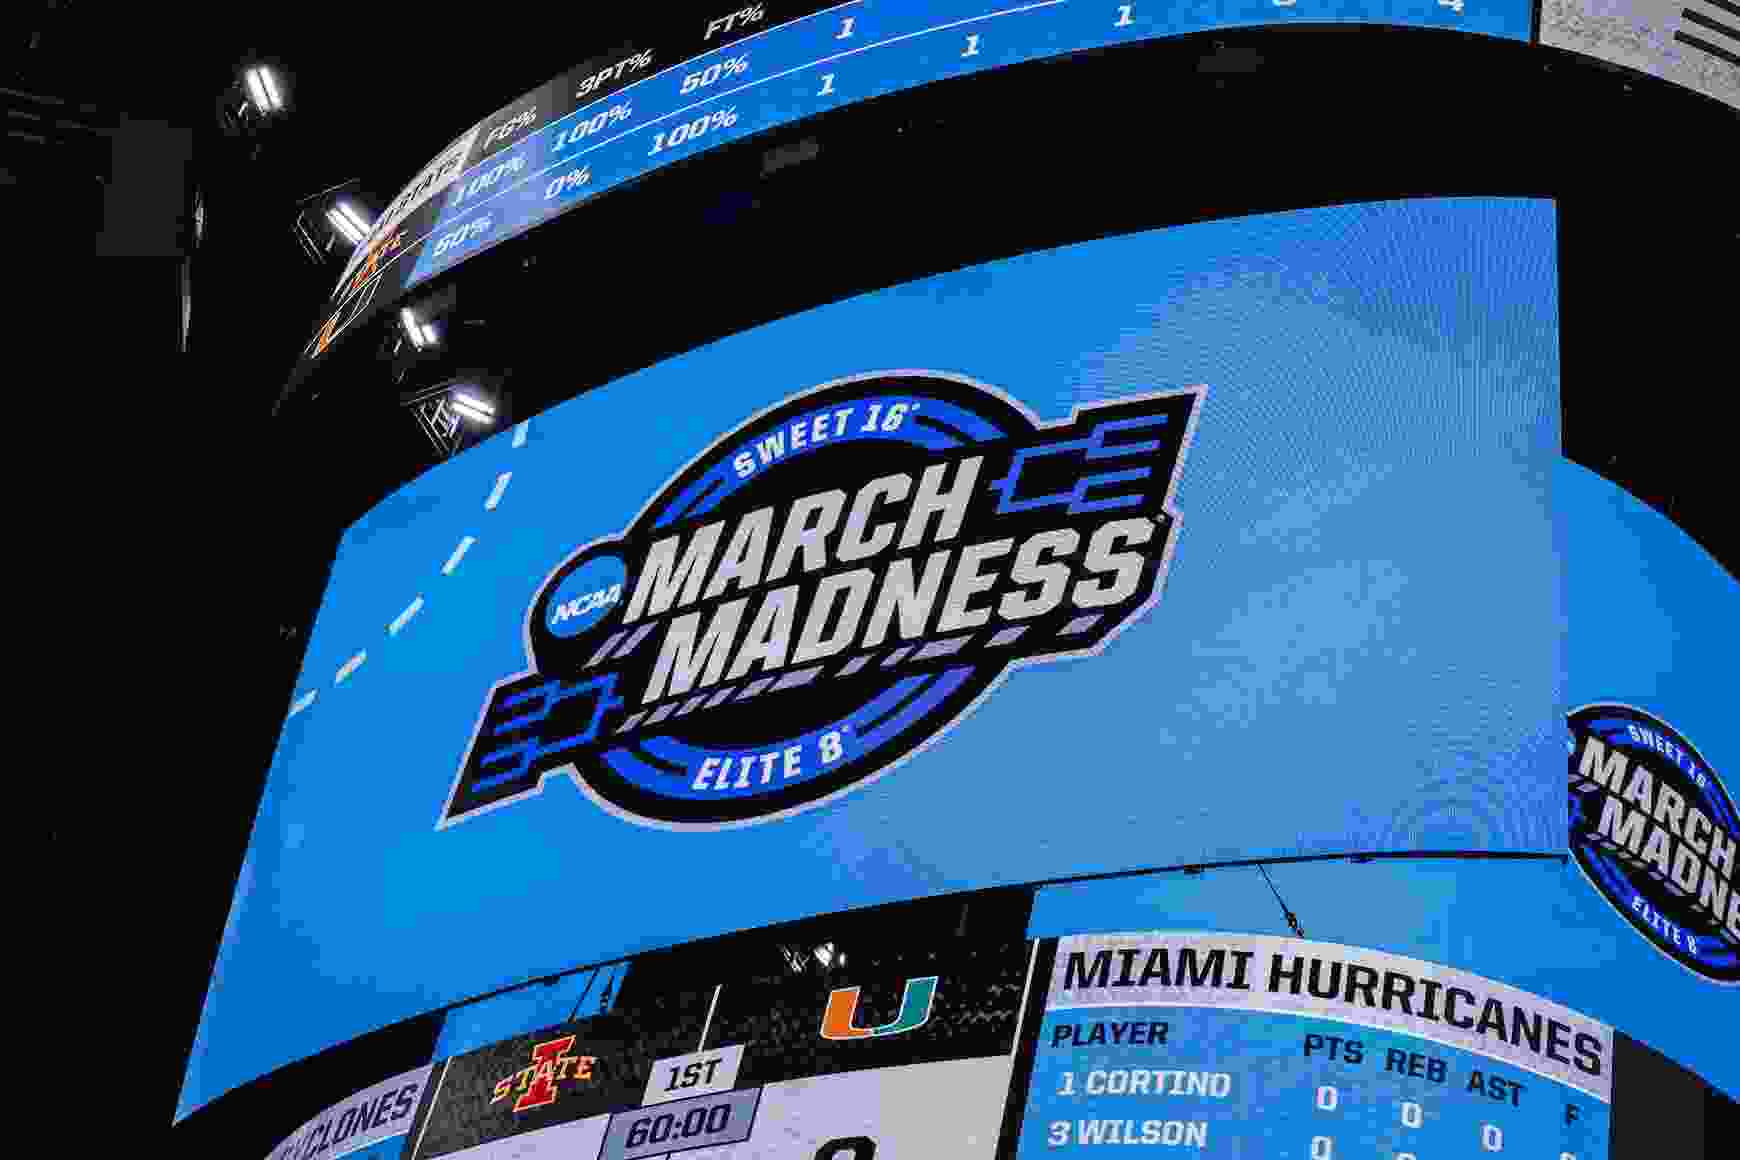 NCAAB and March Madness